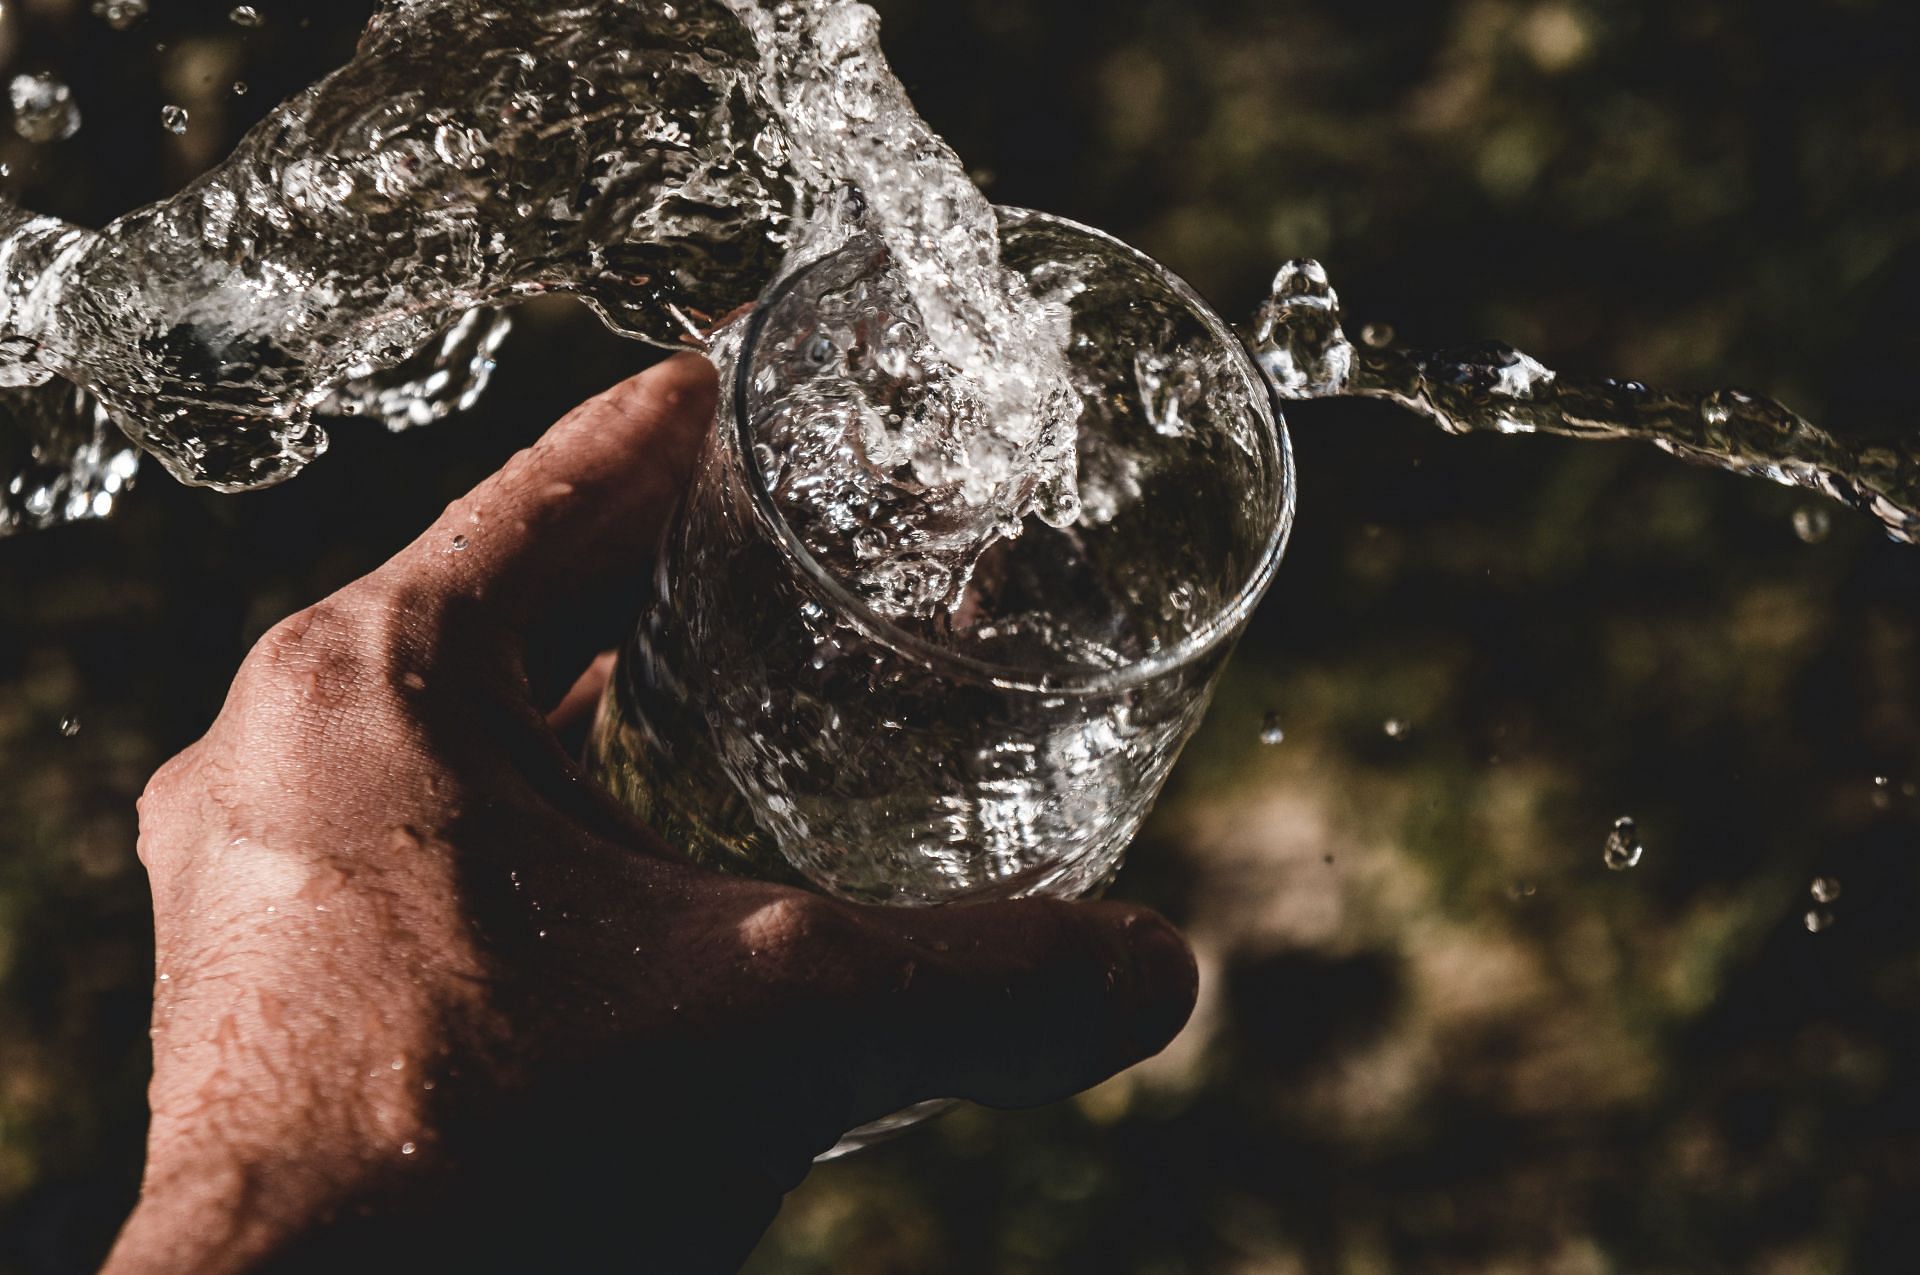 It is crucial to drink sufficient amount of water in a day. (Image via Unsplash/ Anderson Rian)